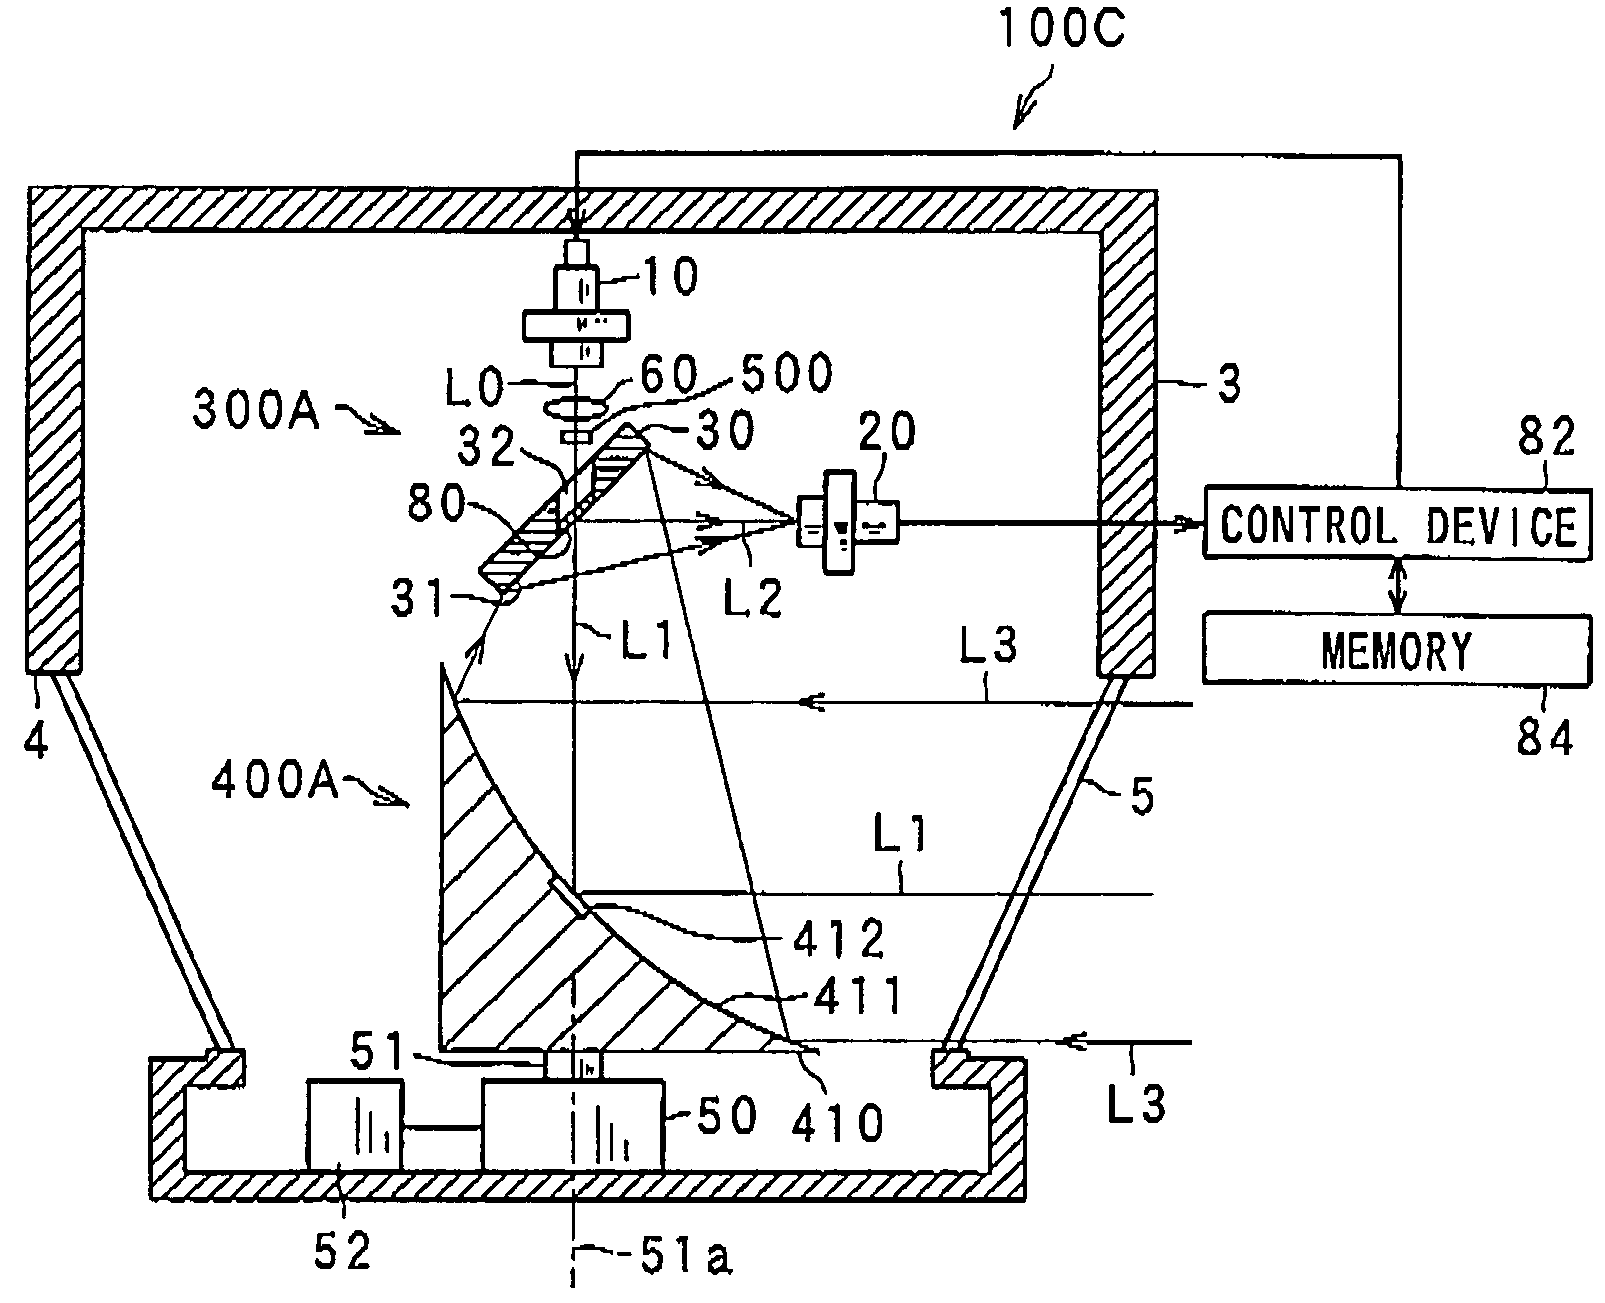 Laser radar apparatus that measures direction and distance of an object